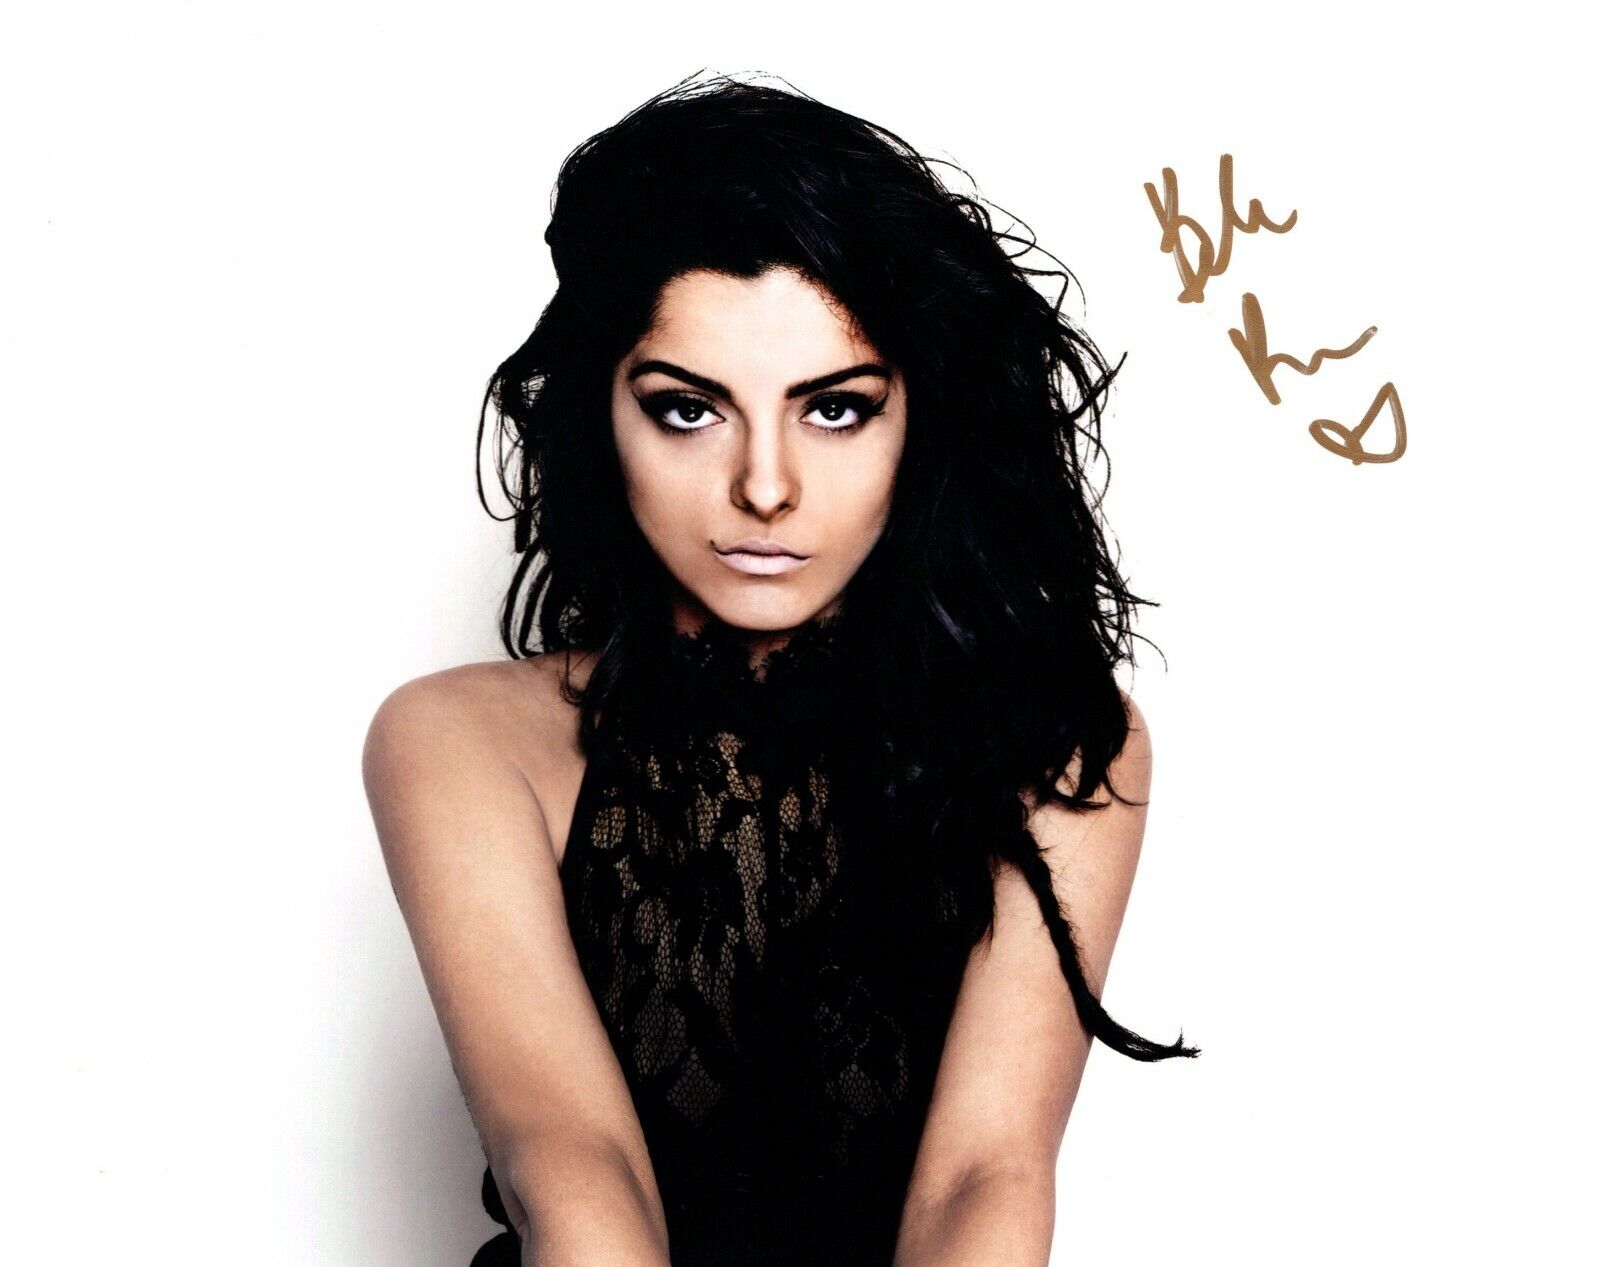 Bebe Rexha Signed Early FULL NAME Autographed Singer 8x10 inch Photo Poster painting + RDM COA